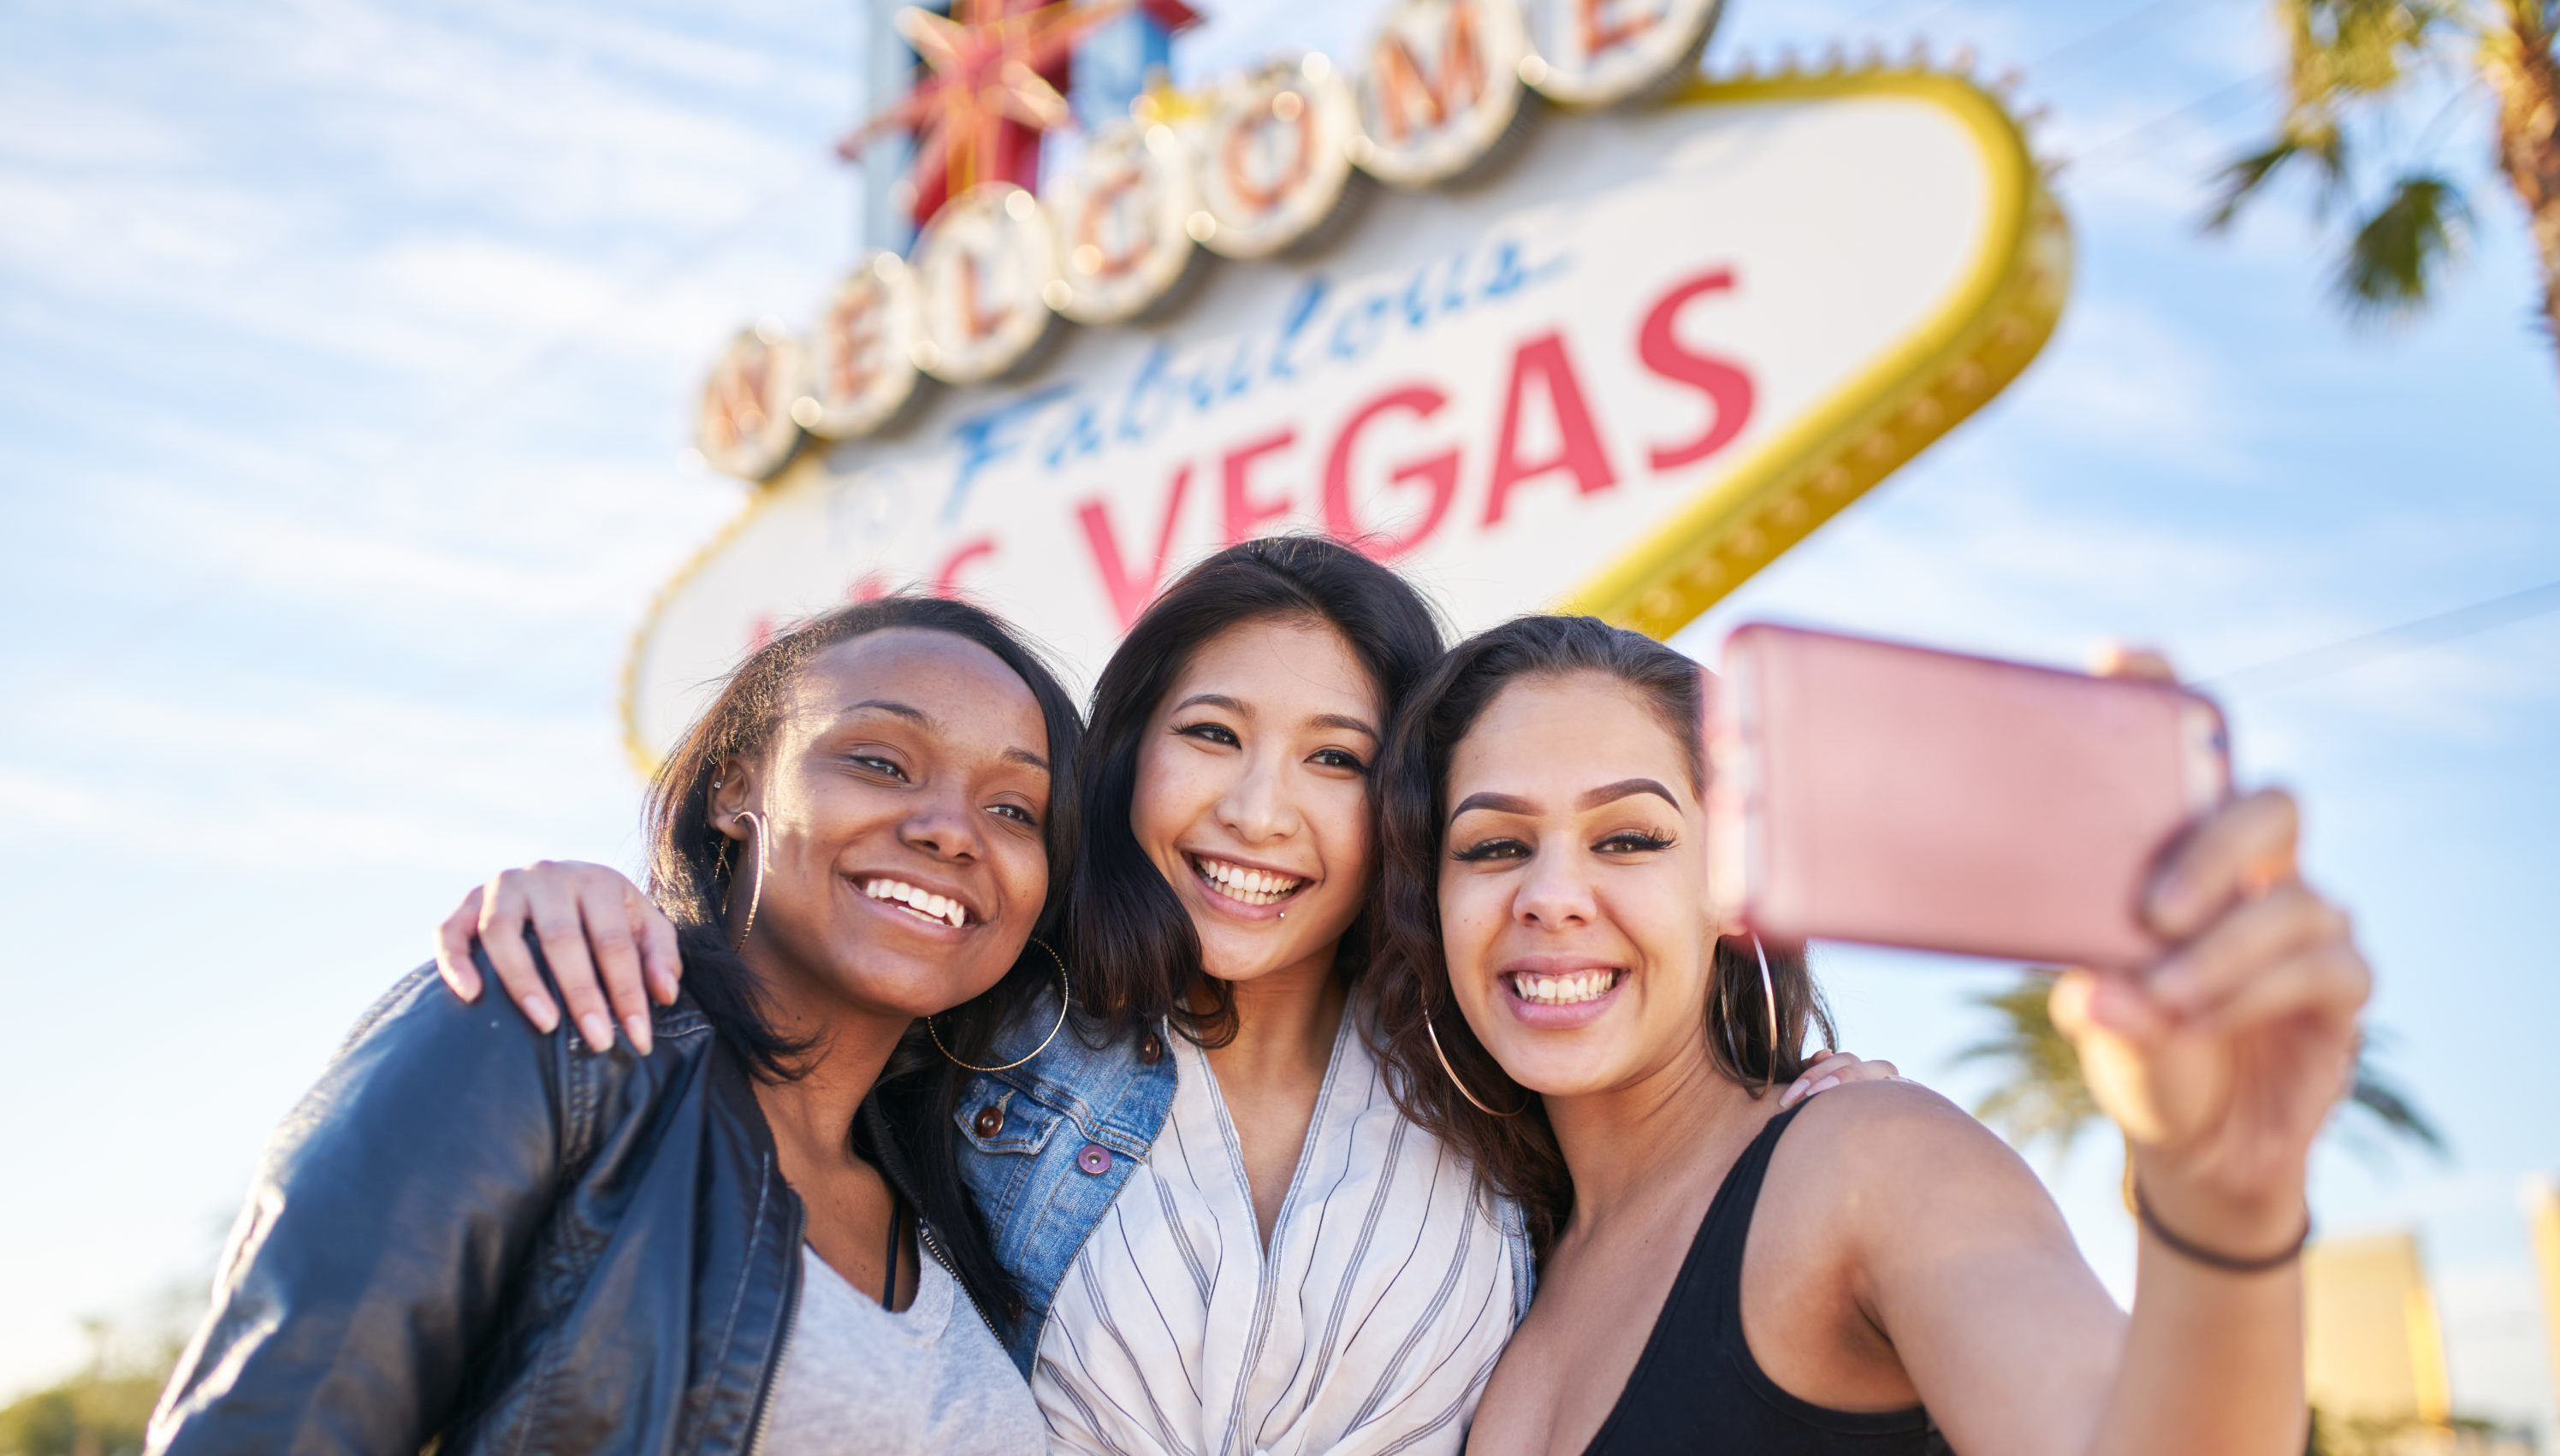 Three young women in front of the Las Vegas sign taking a selfie